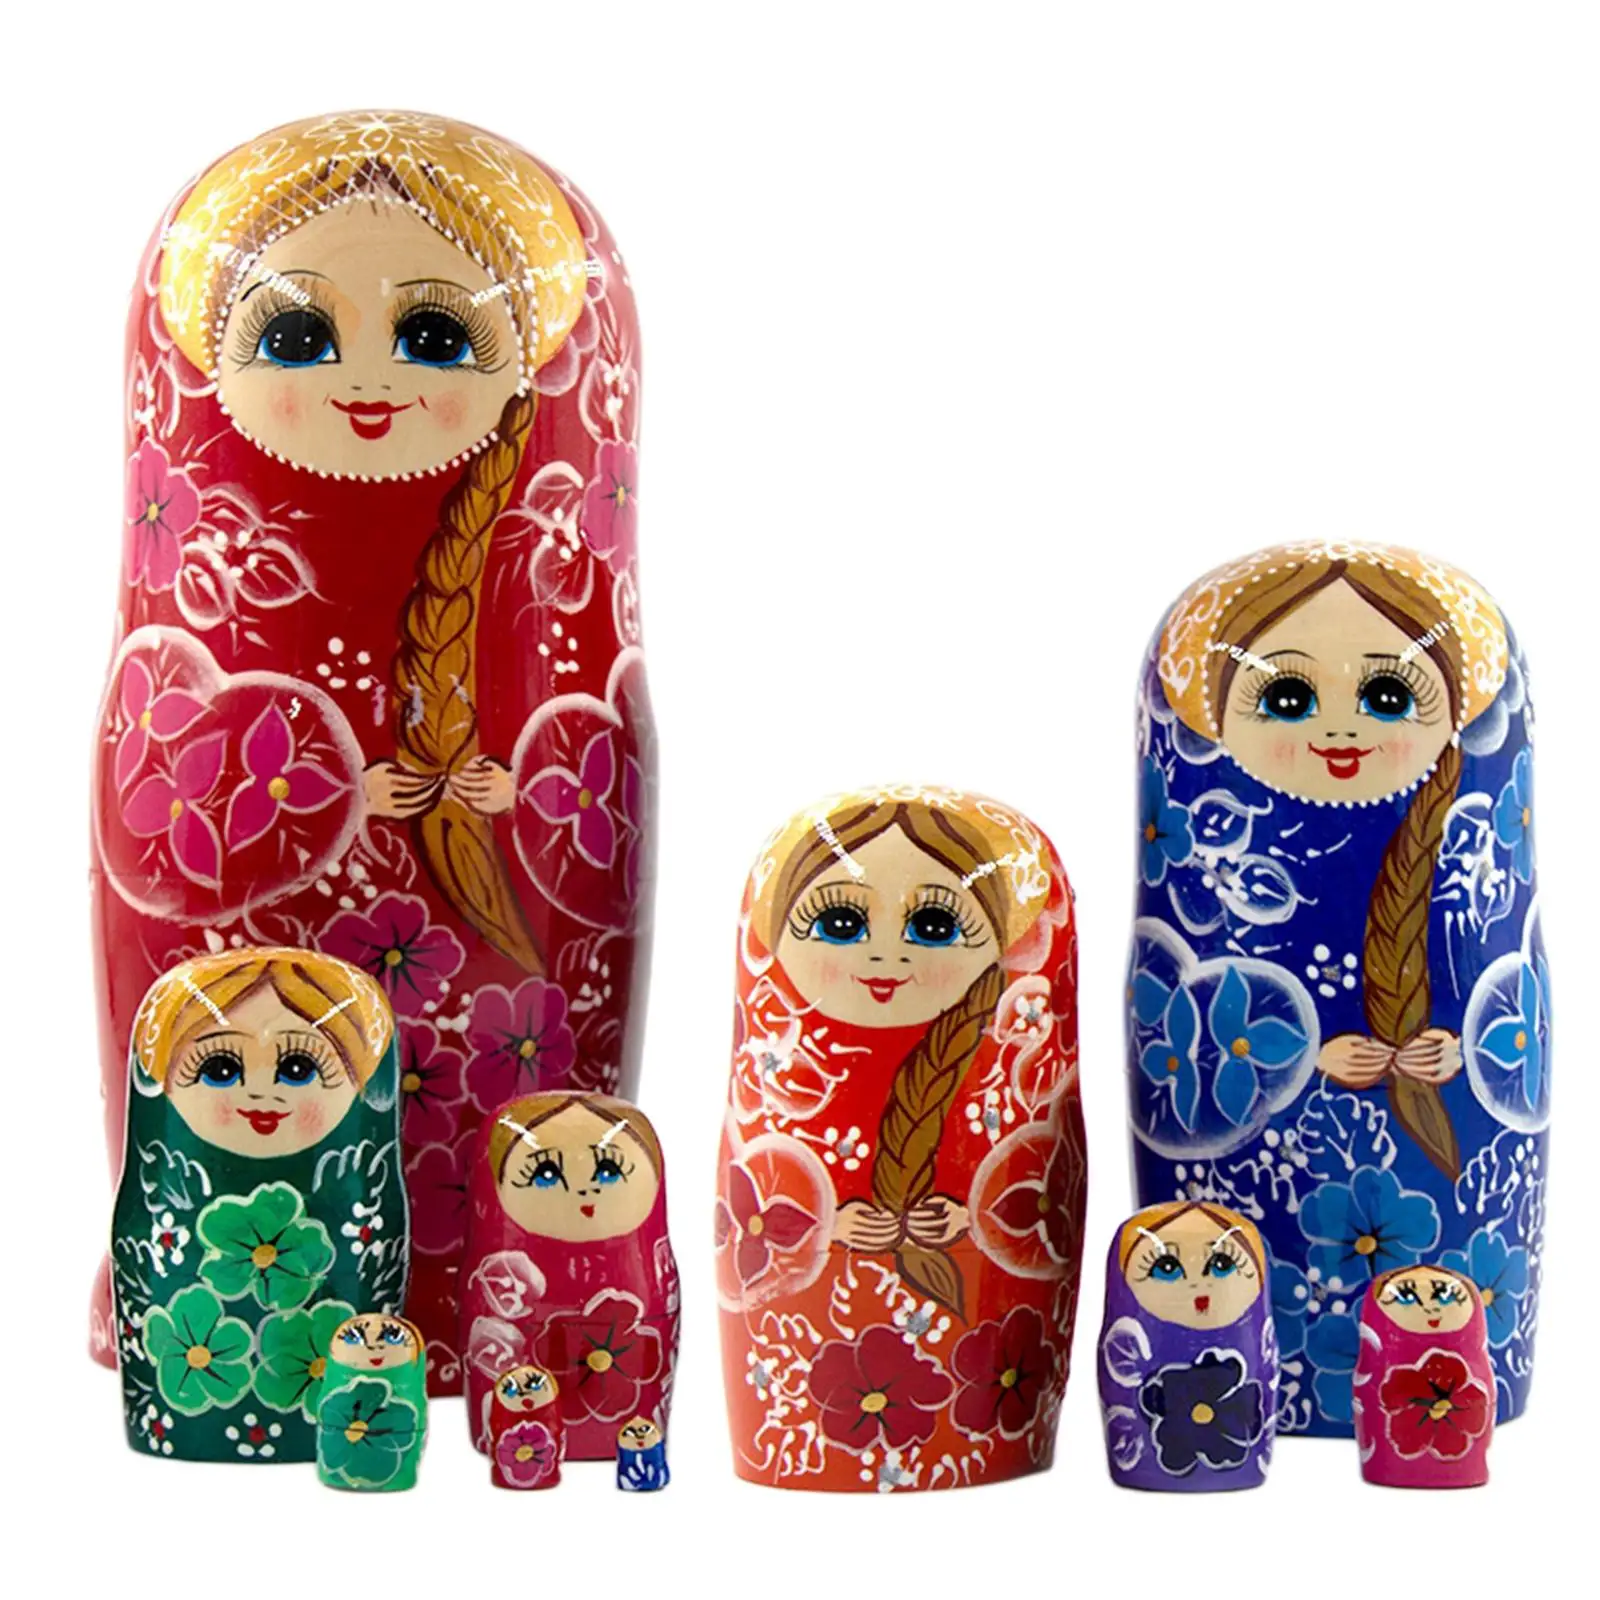 10 Pieces Novelty Nesting Dolls Toy Educational Toy Ornaments Matryoshka for Tabletop Shop Window Party Living Room Girls Boys